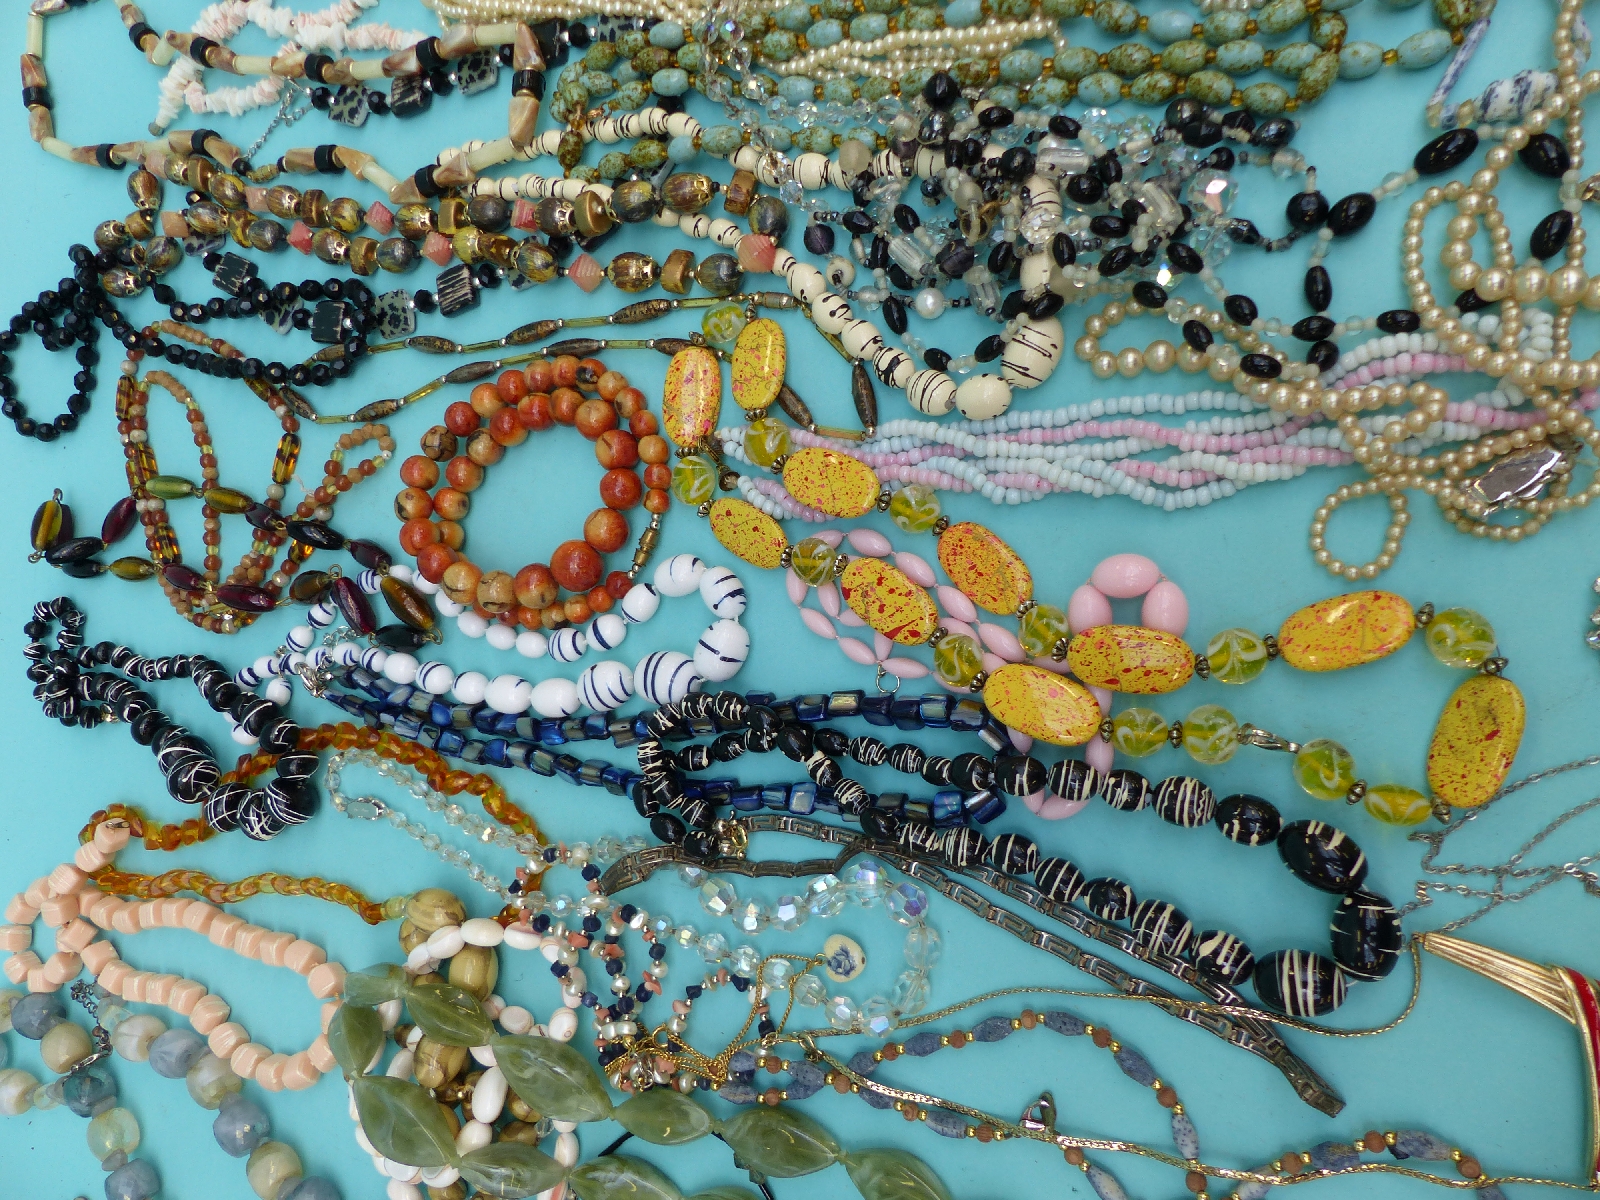 A collection of beads to include glass, faux pearls, - Image 3 of 8